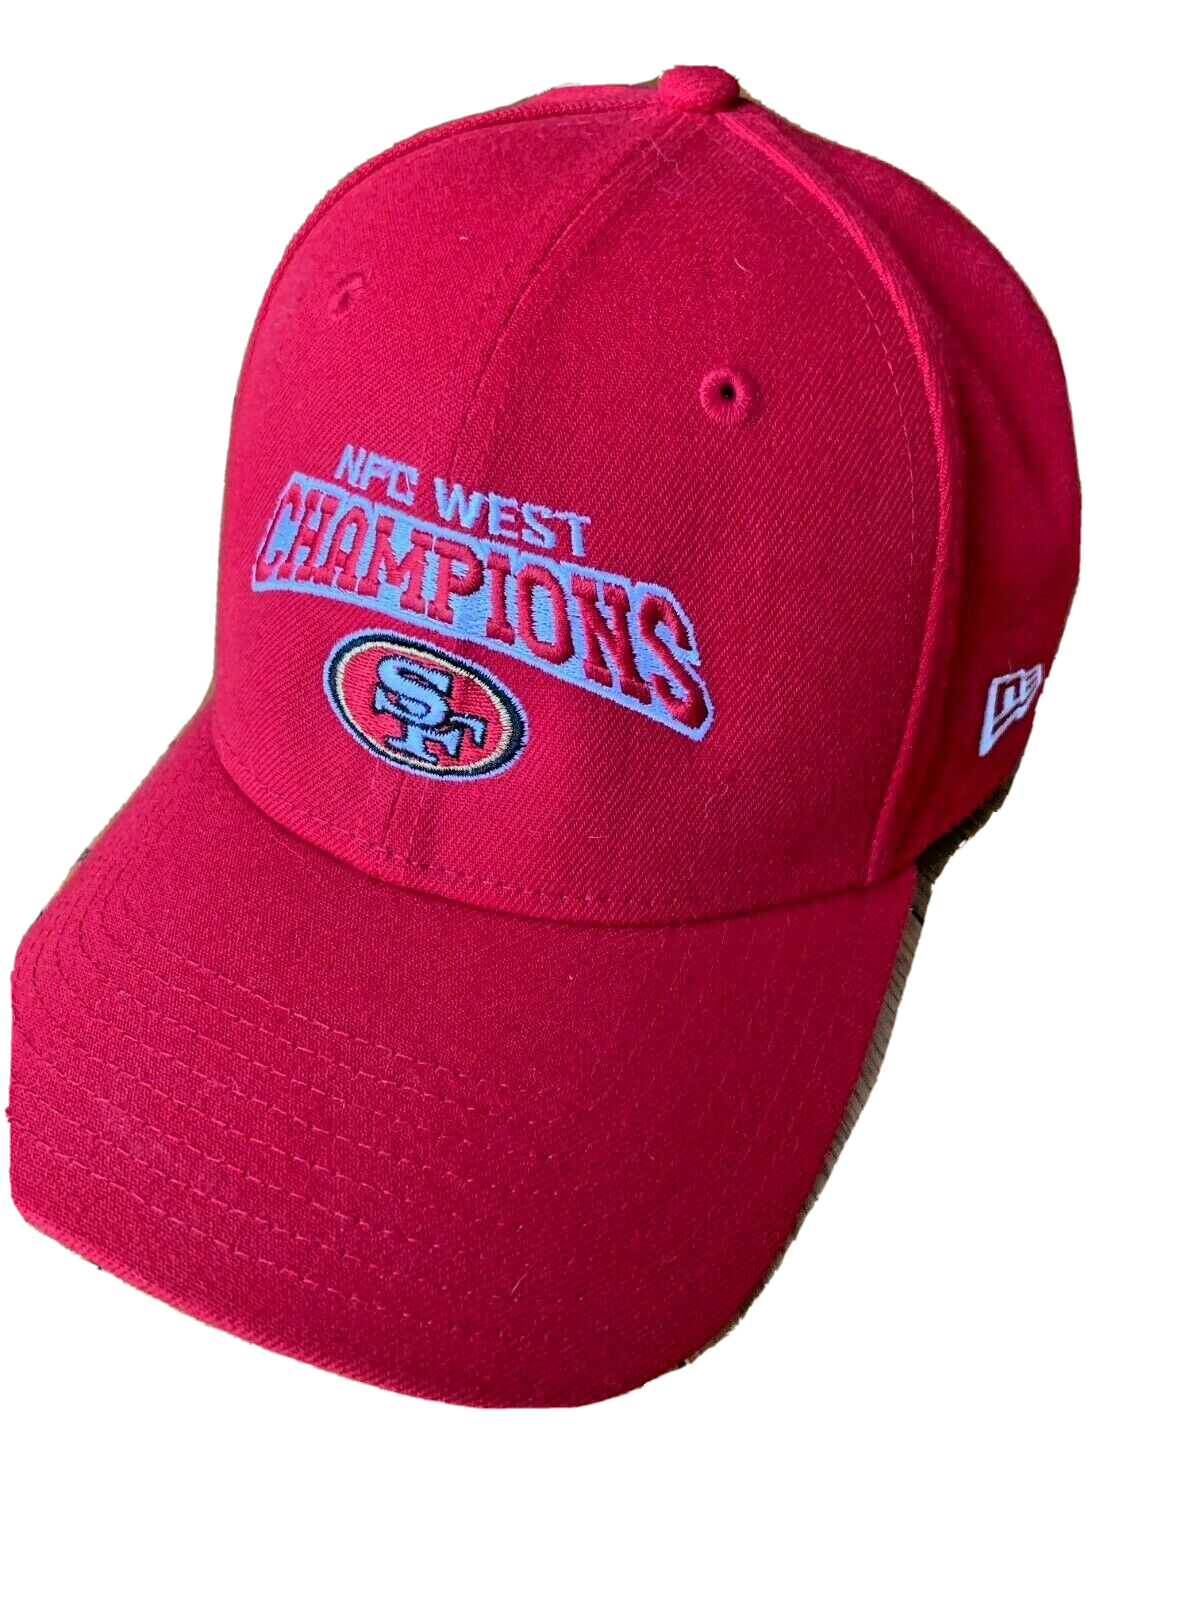 New Era NFC West Champions Red San Francisco 49ers Hat 9Forty Adult Adjustable - $12.95